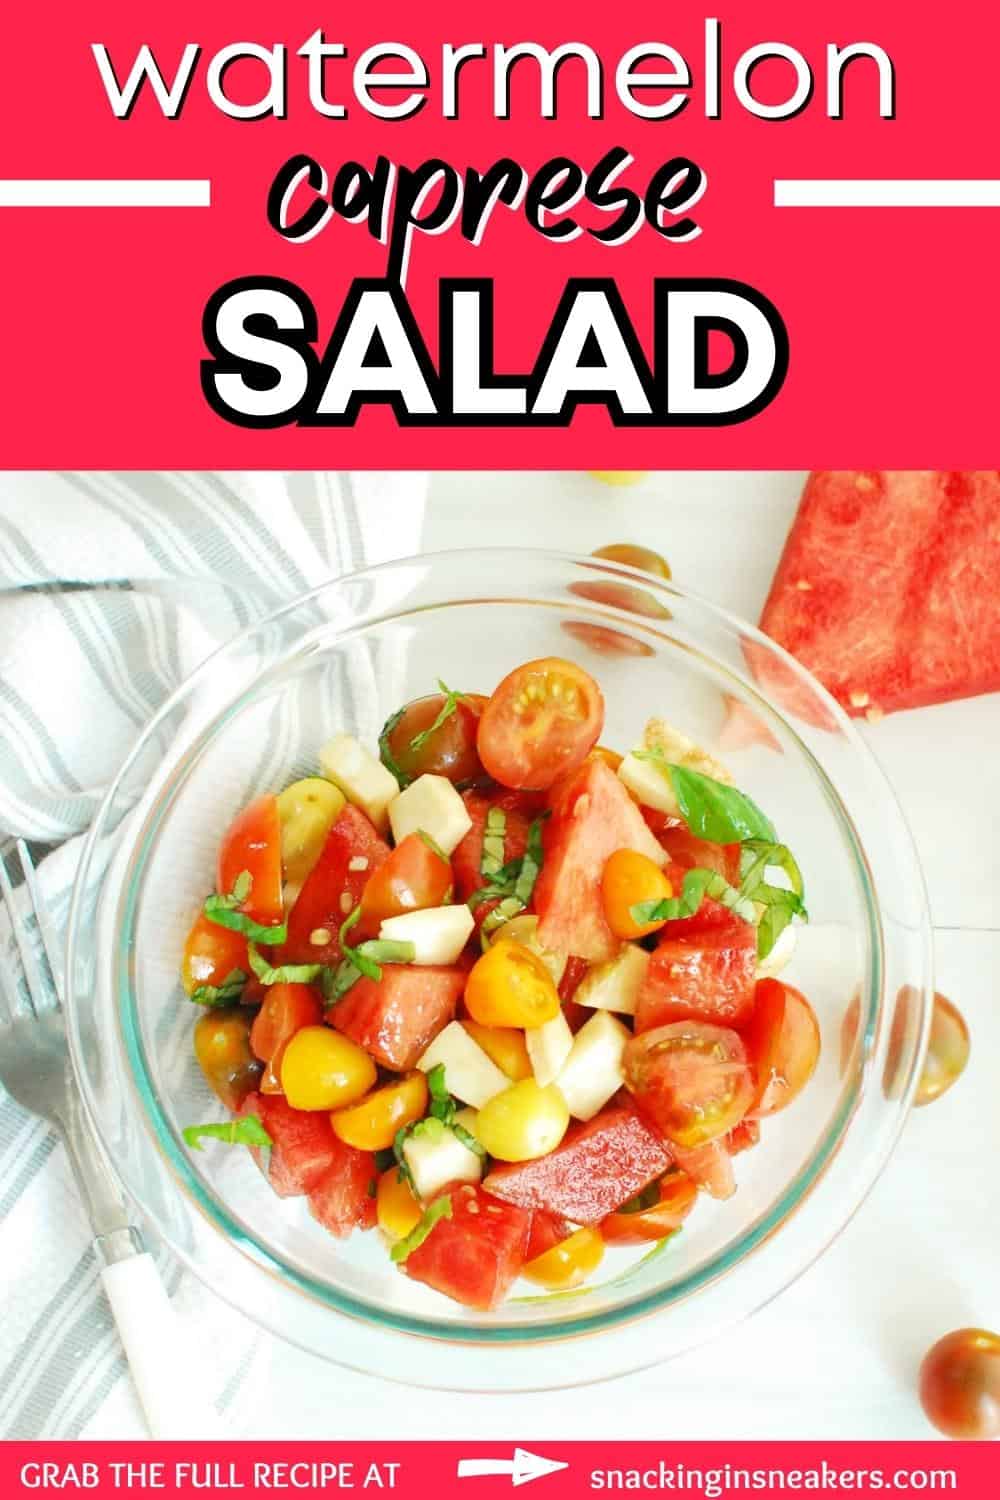 A bowl of watermelon caprese salad next to a napkin and some scattered cherry tomatoes, with a text overlay with the name of the recipe.